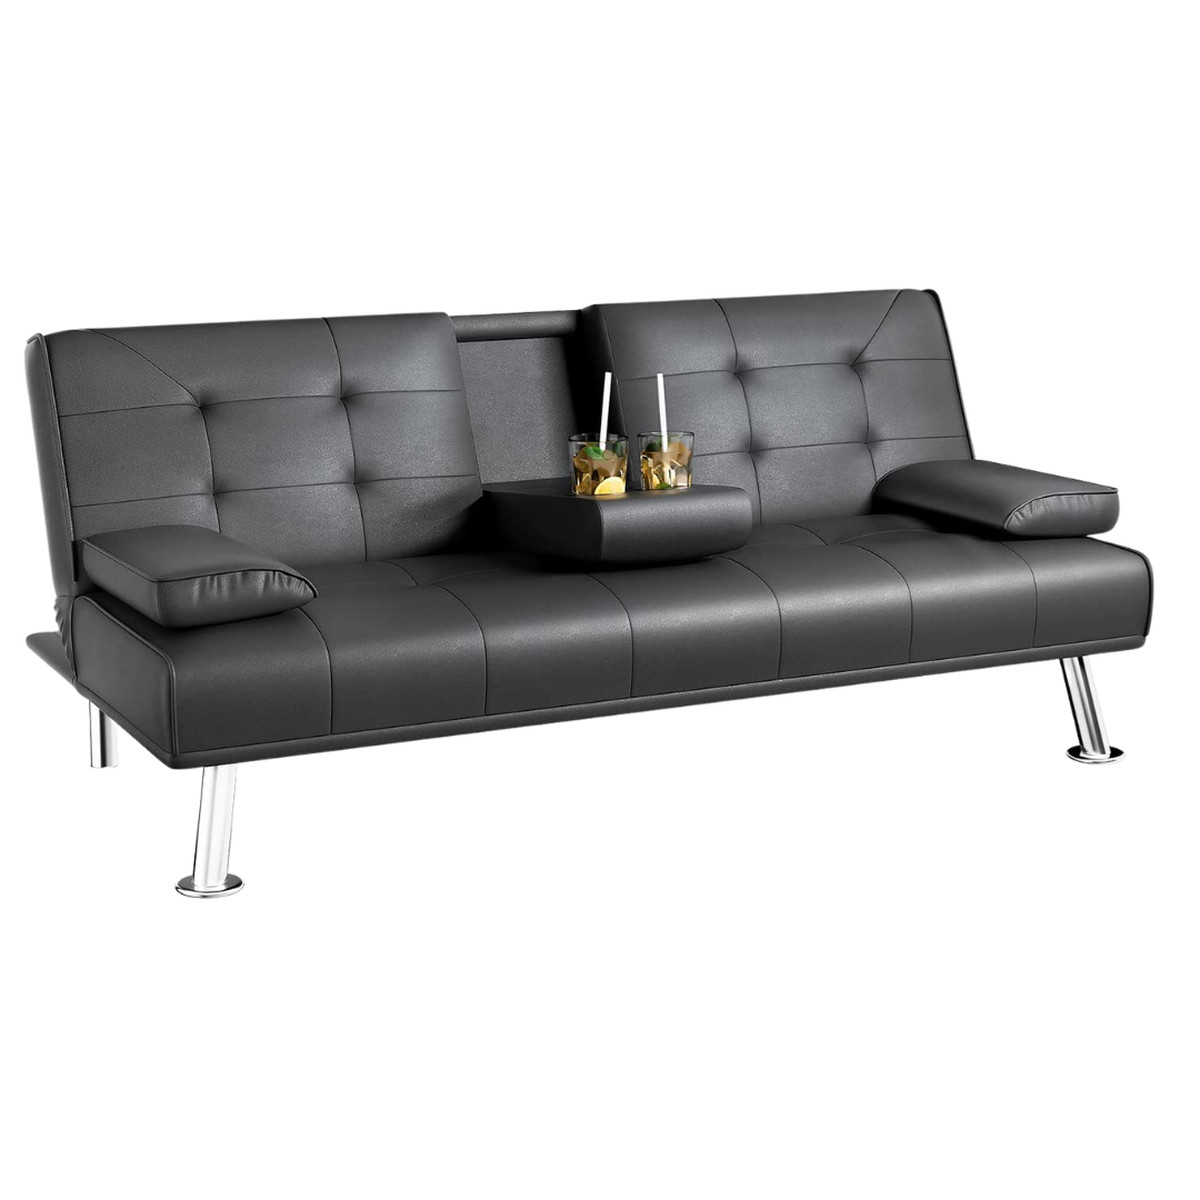 JUMMICO Futon Sofa Bed with two drinks in the center console